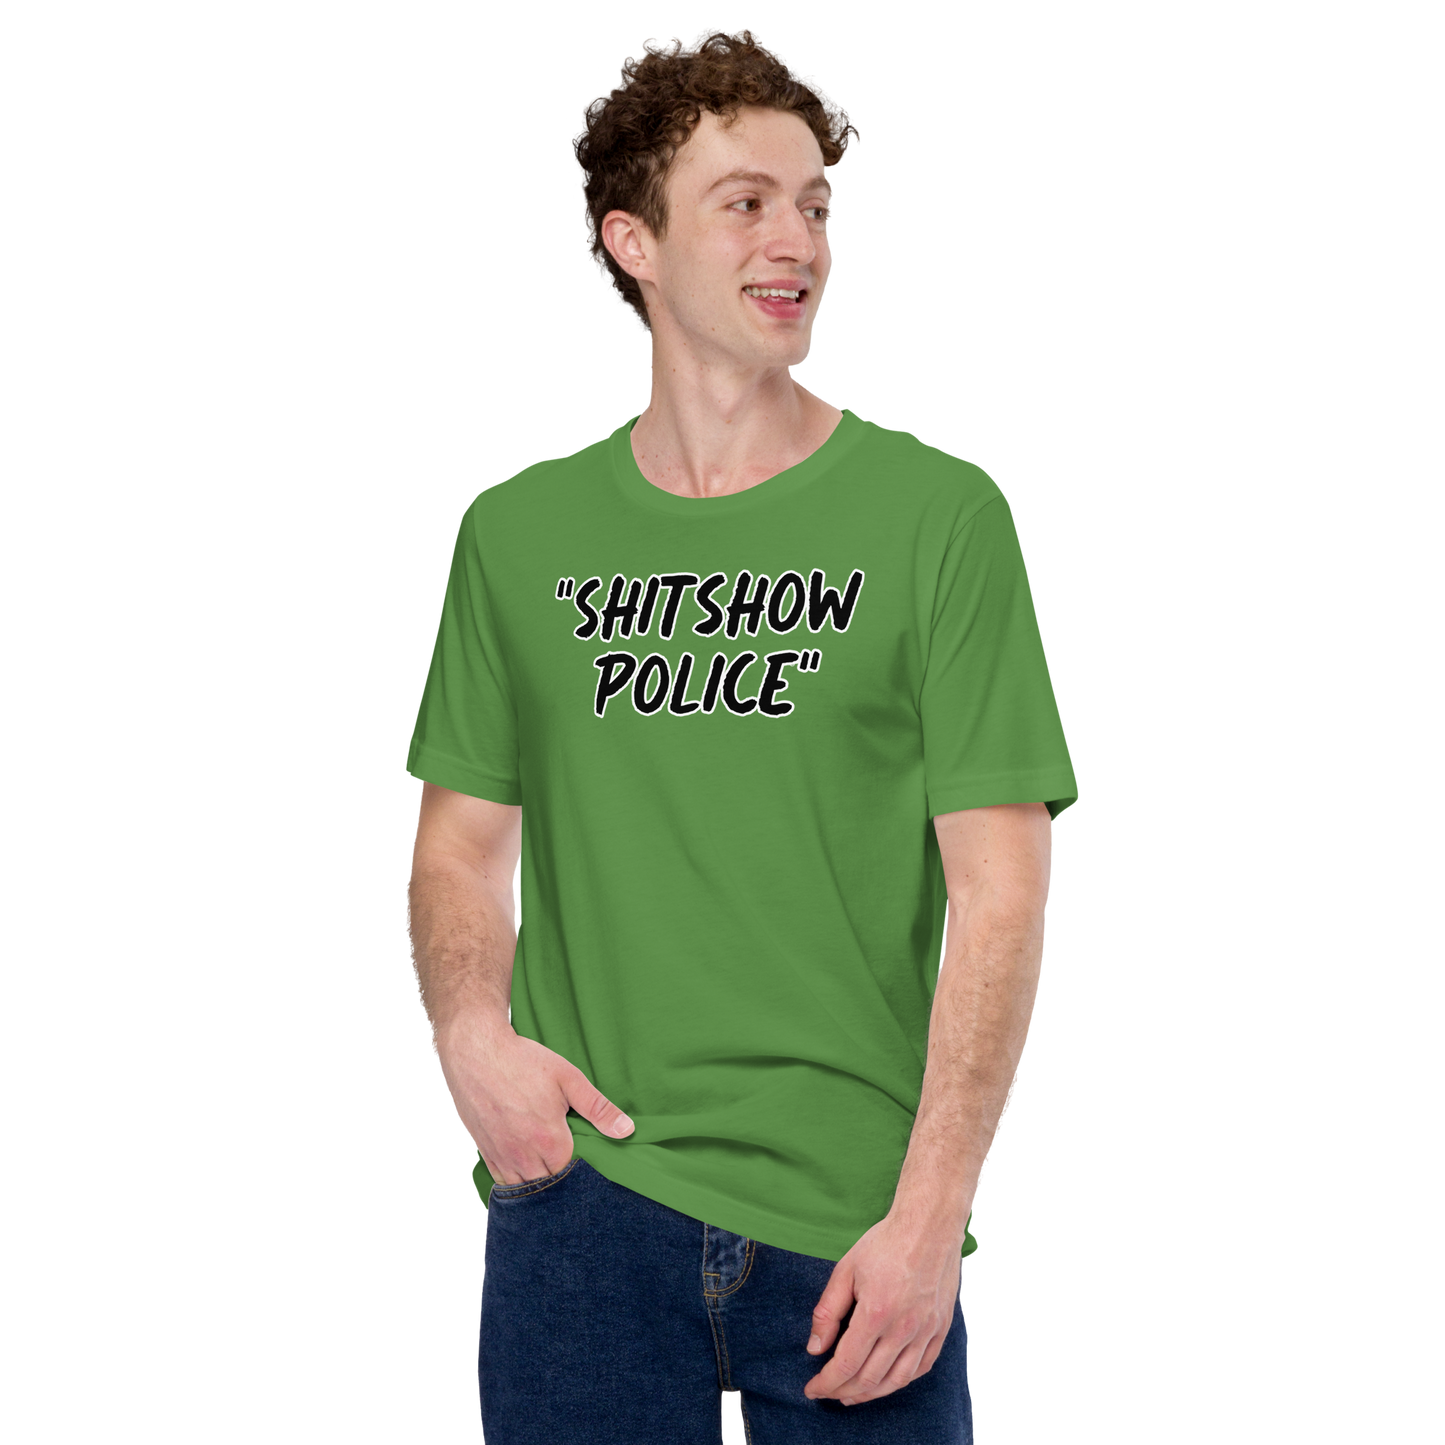 Police Show T-shirt